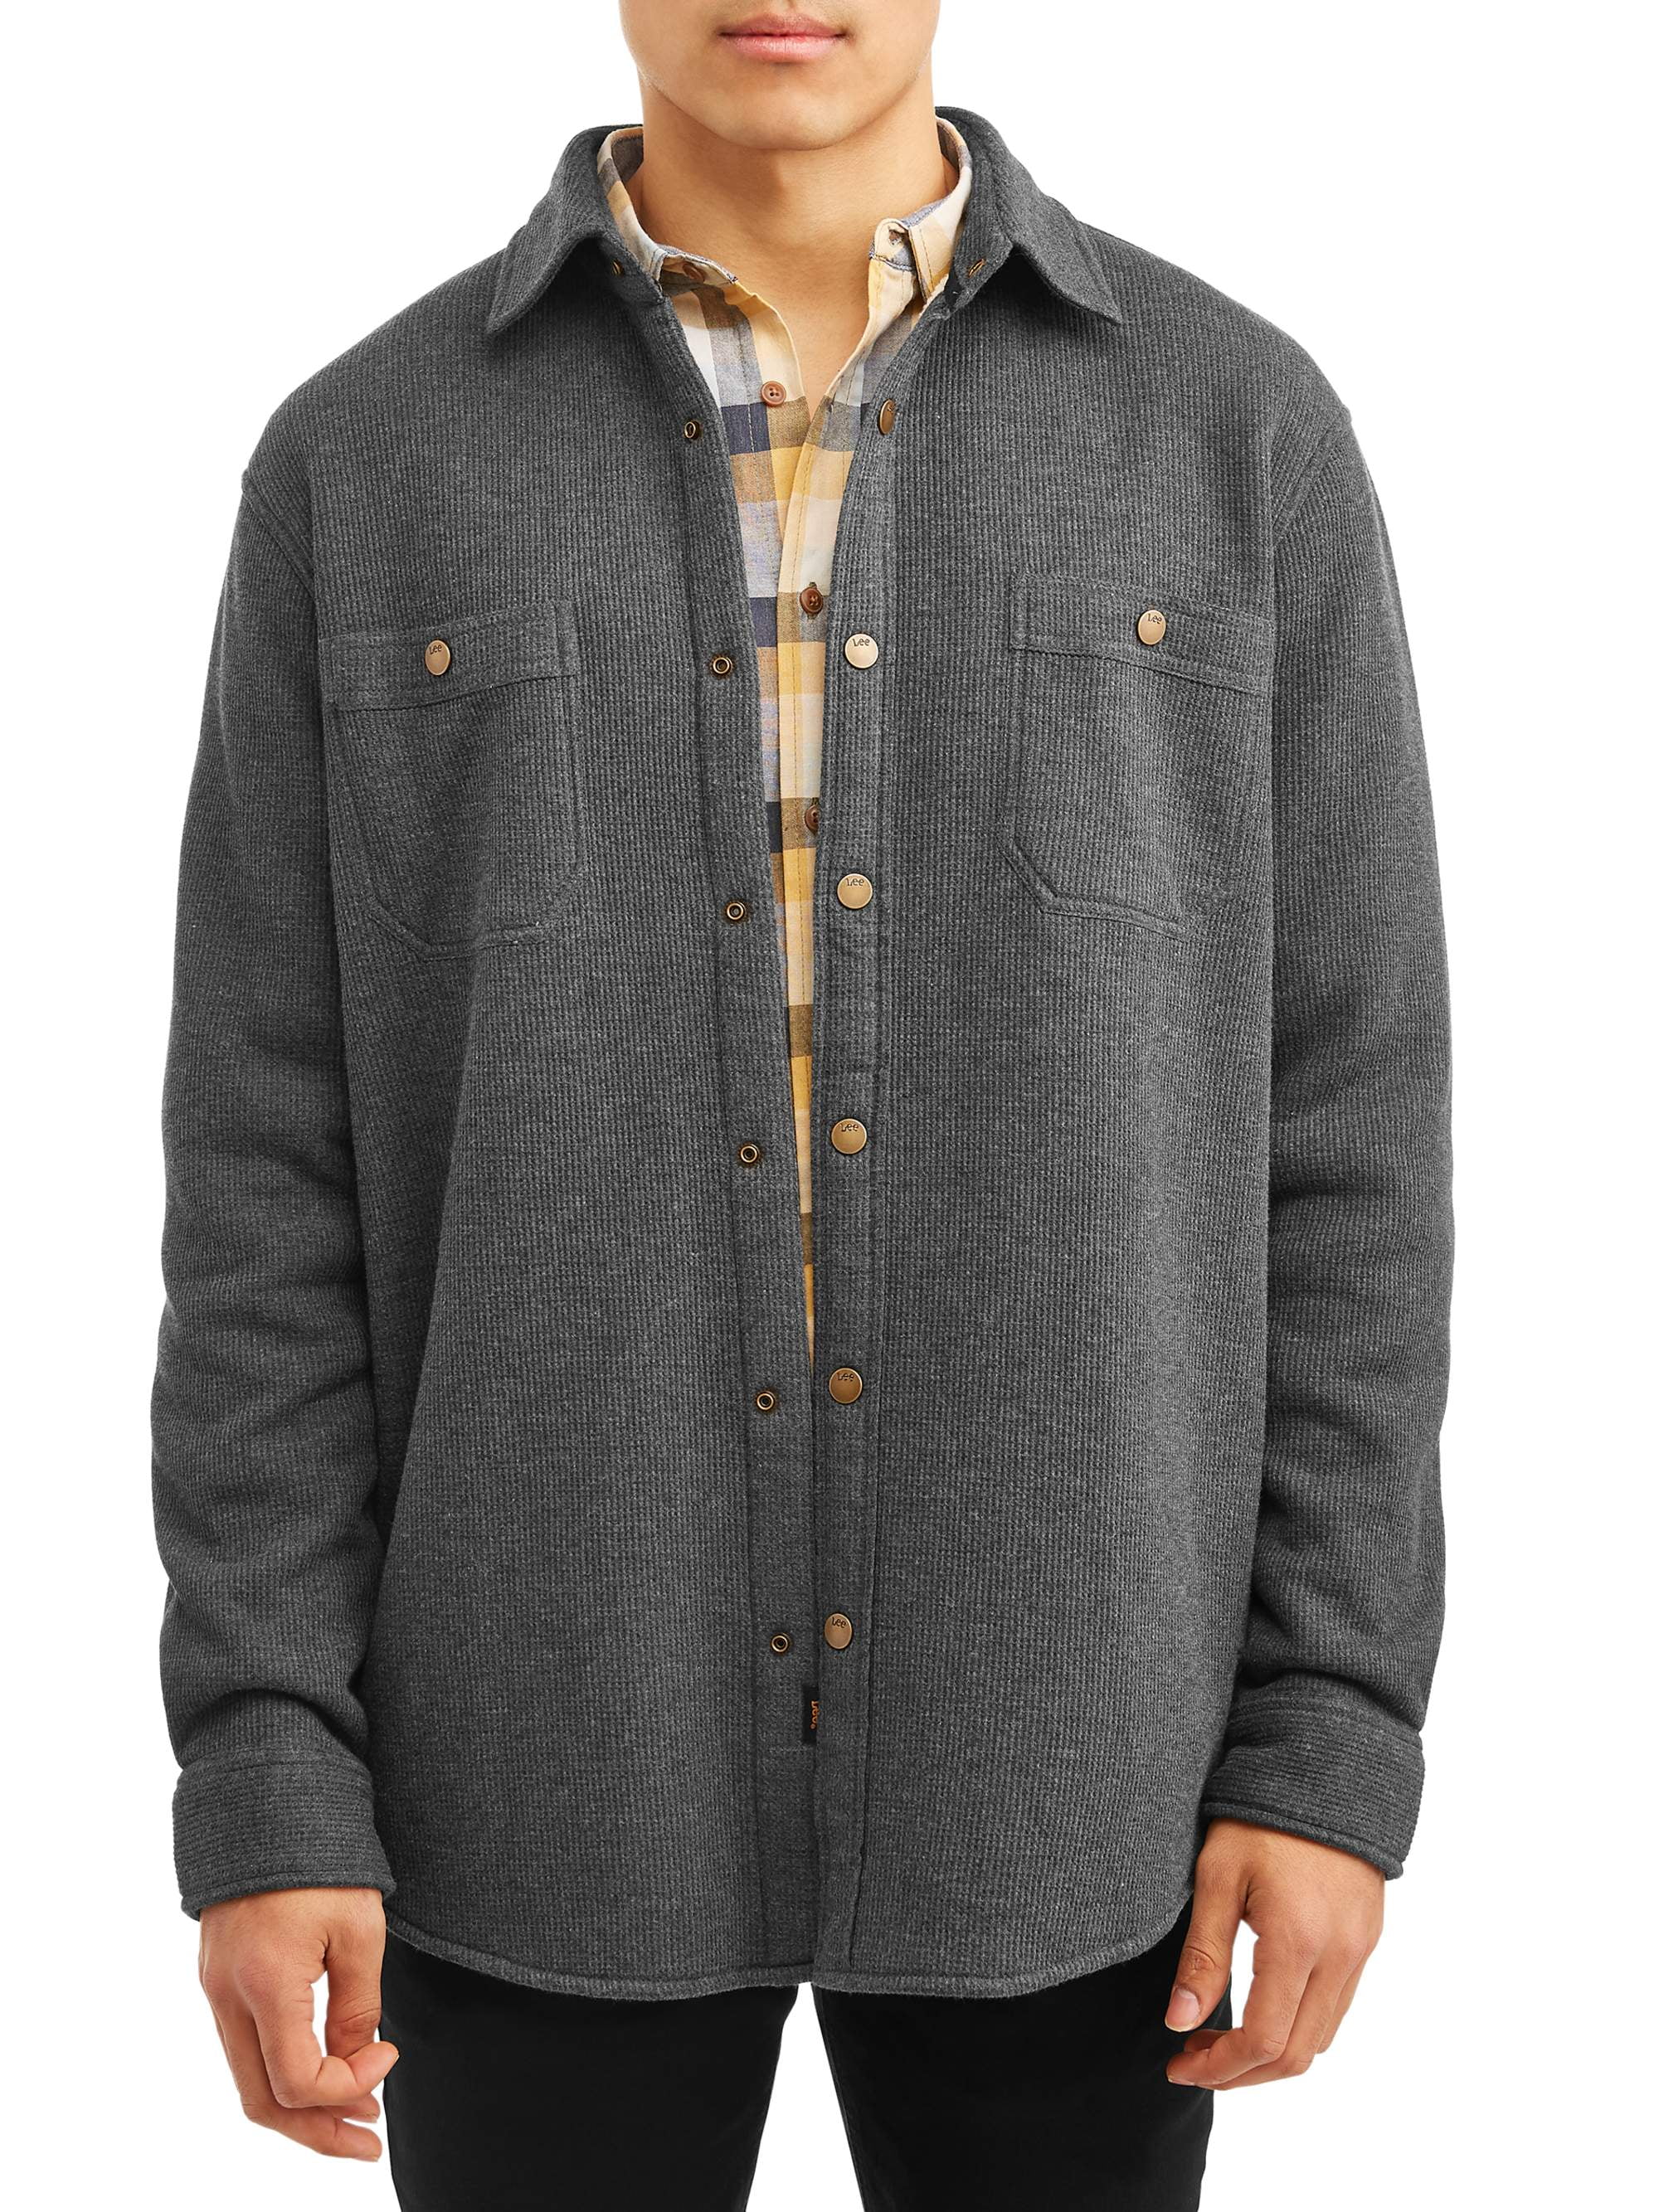 Lee Men's Thermal Shirt Jacket with Sherpa Lining, Available up to size ...